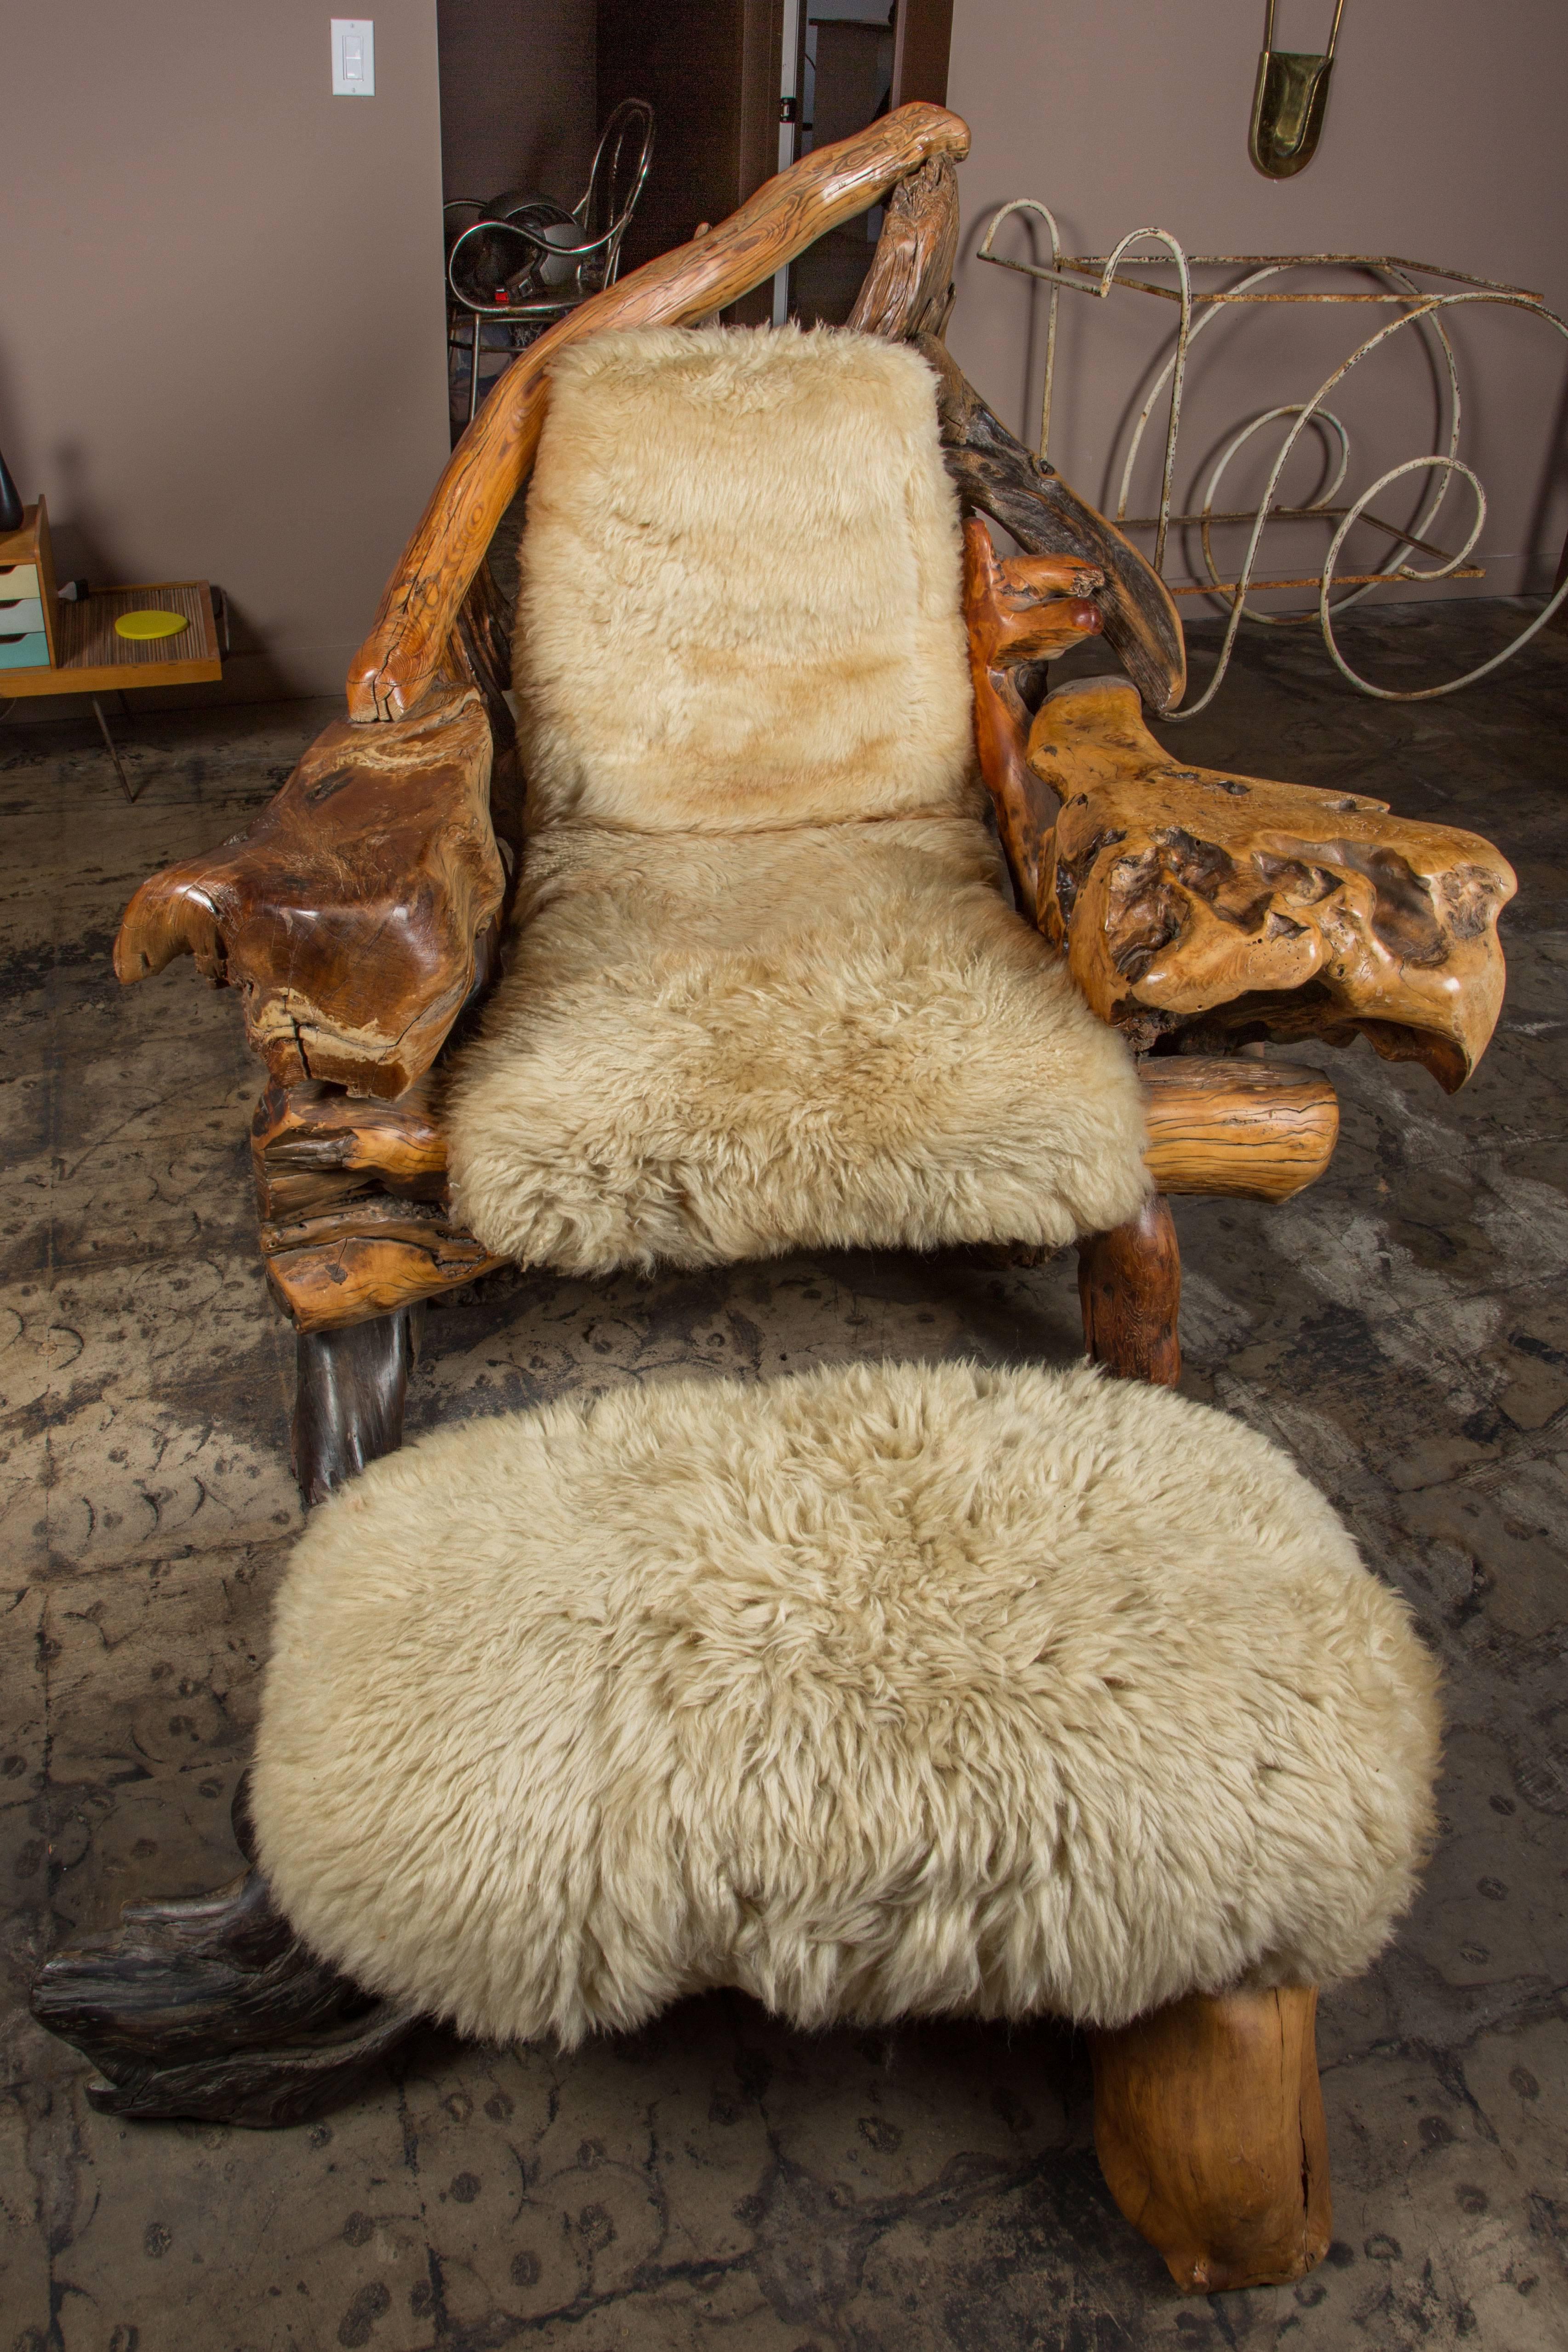 Throne like, handcrafted organic burl wood lounge chair and ottoman with sheepskin upholstery and pillow. Made in California, circa 1960s.

Ottoman measures 35" W x 16" D x 15" H.